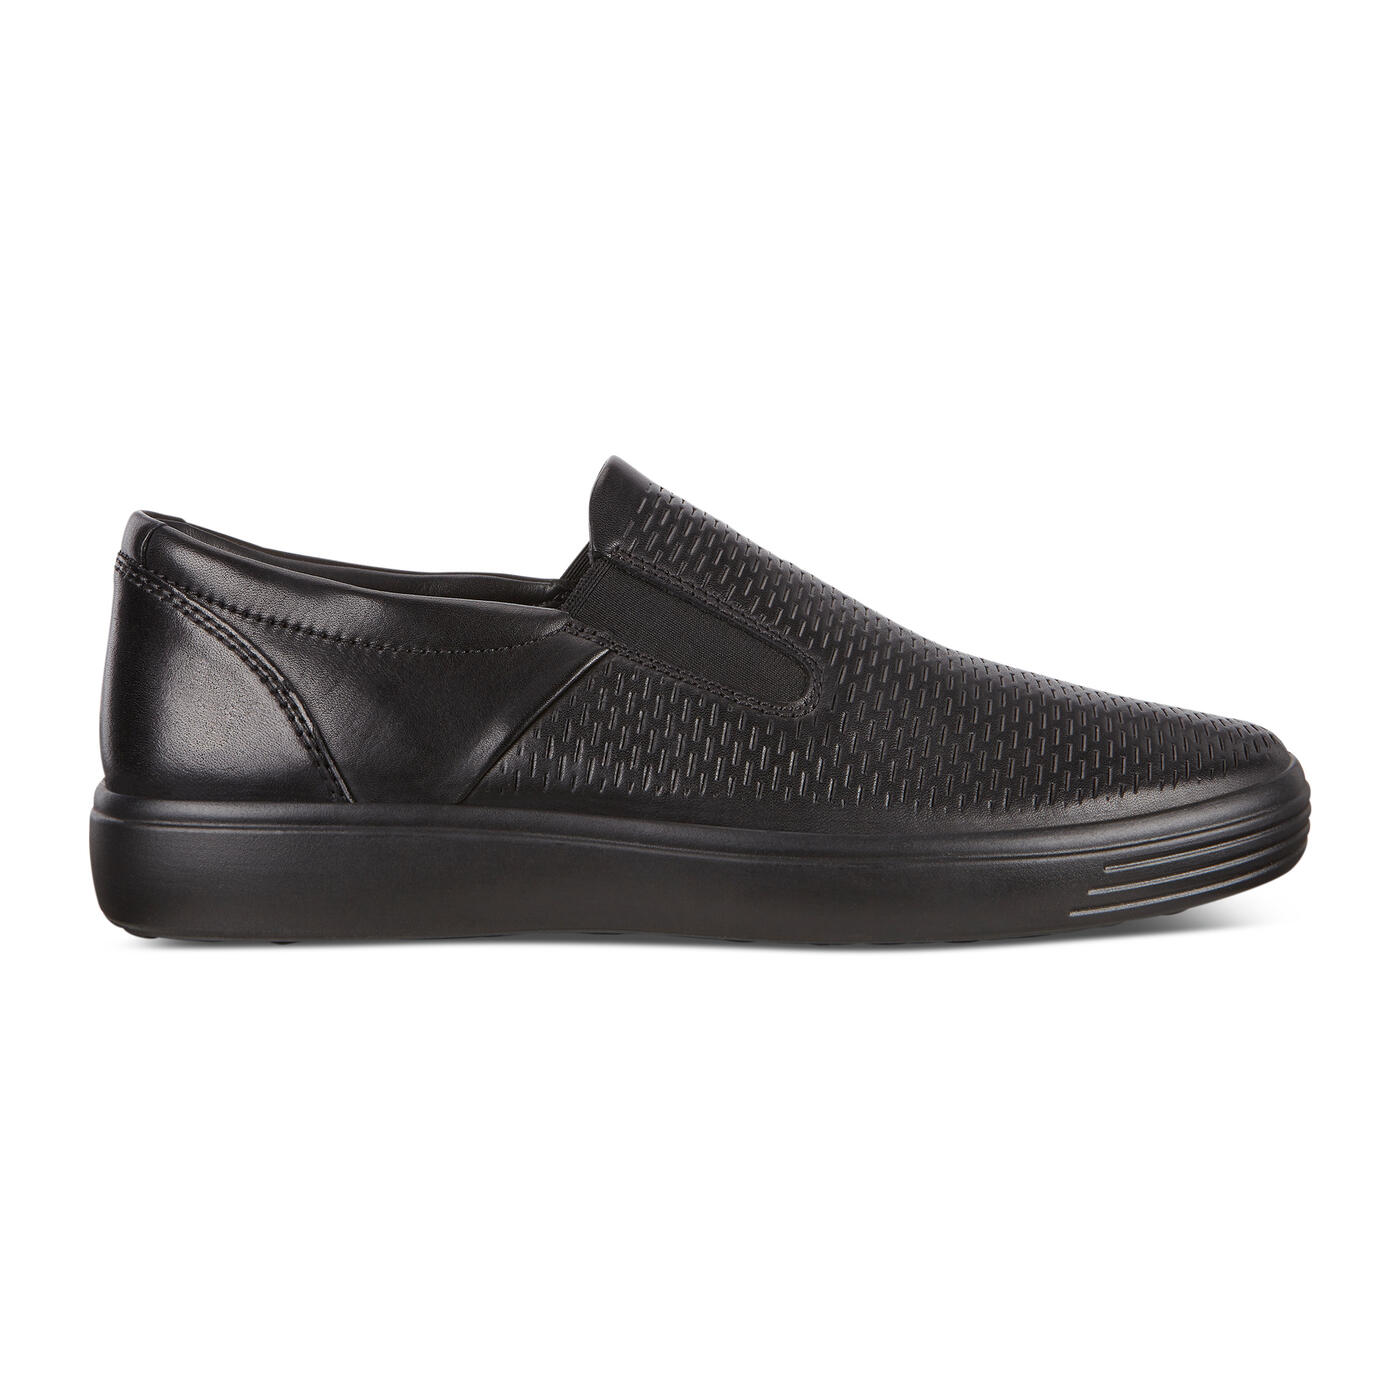 ECCO SOFT 7 MEN'S SLIP ON SNEAKERS | Official ECCO® Shoes